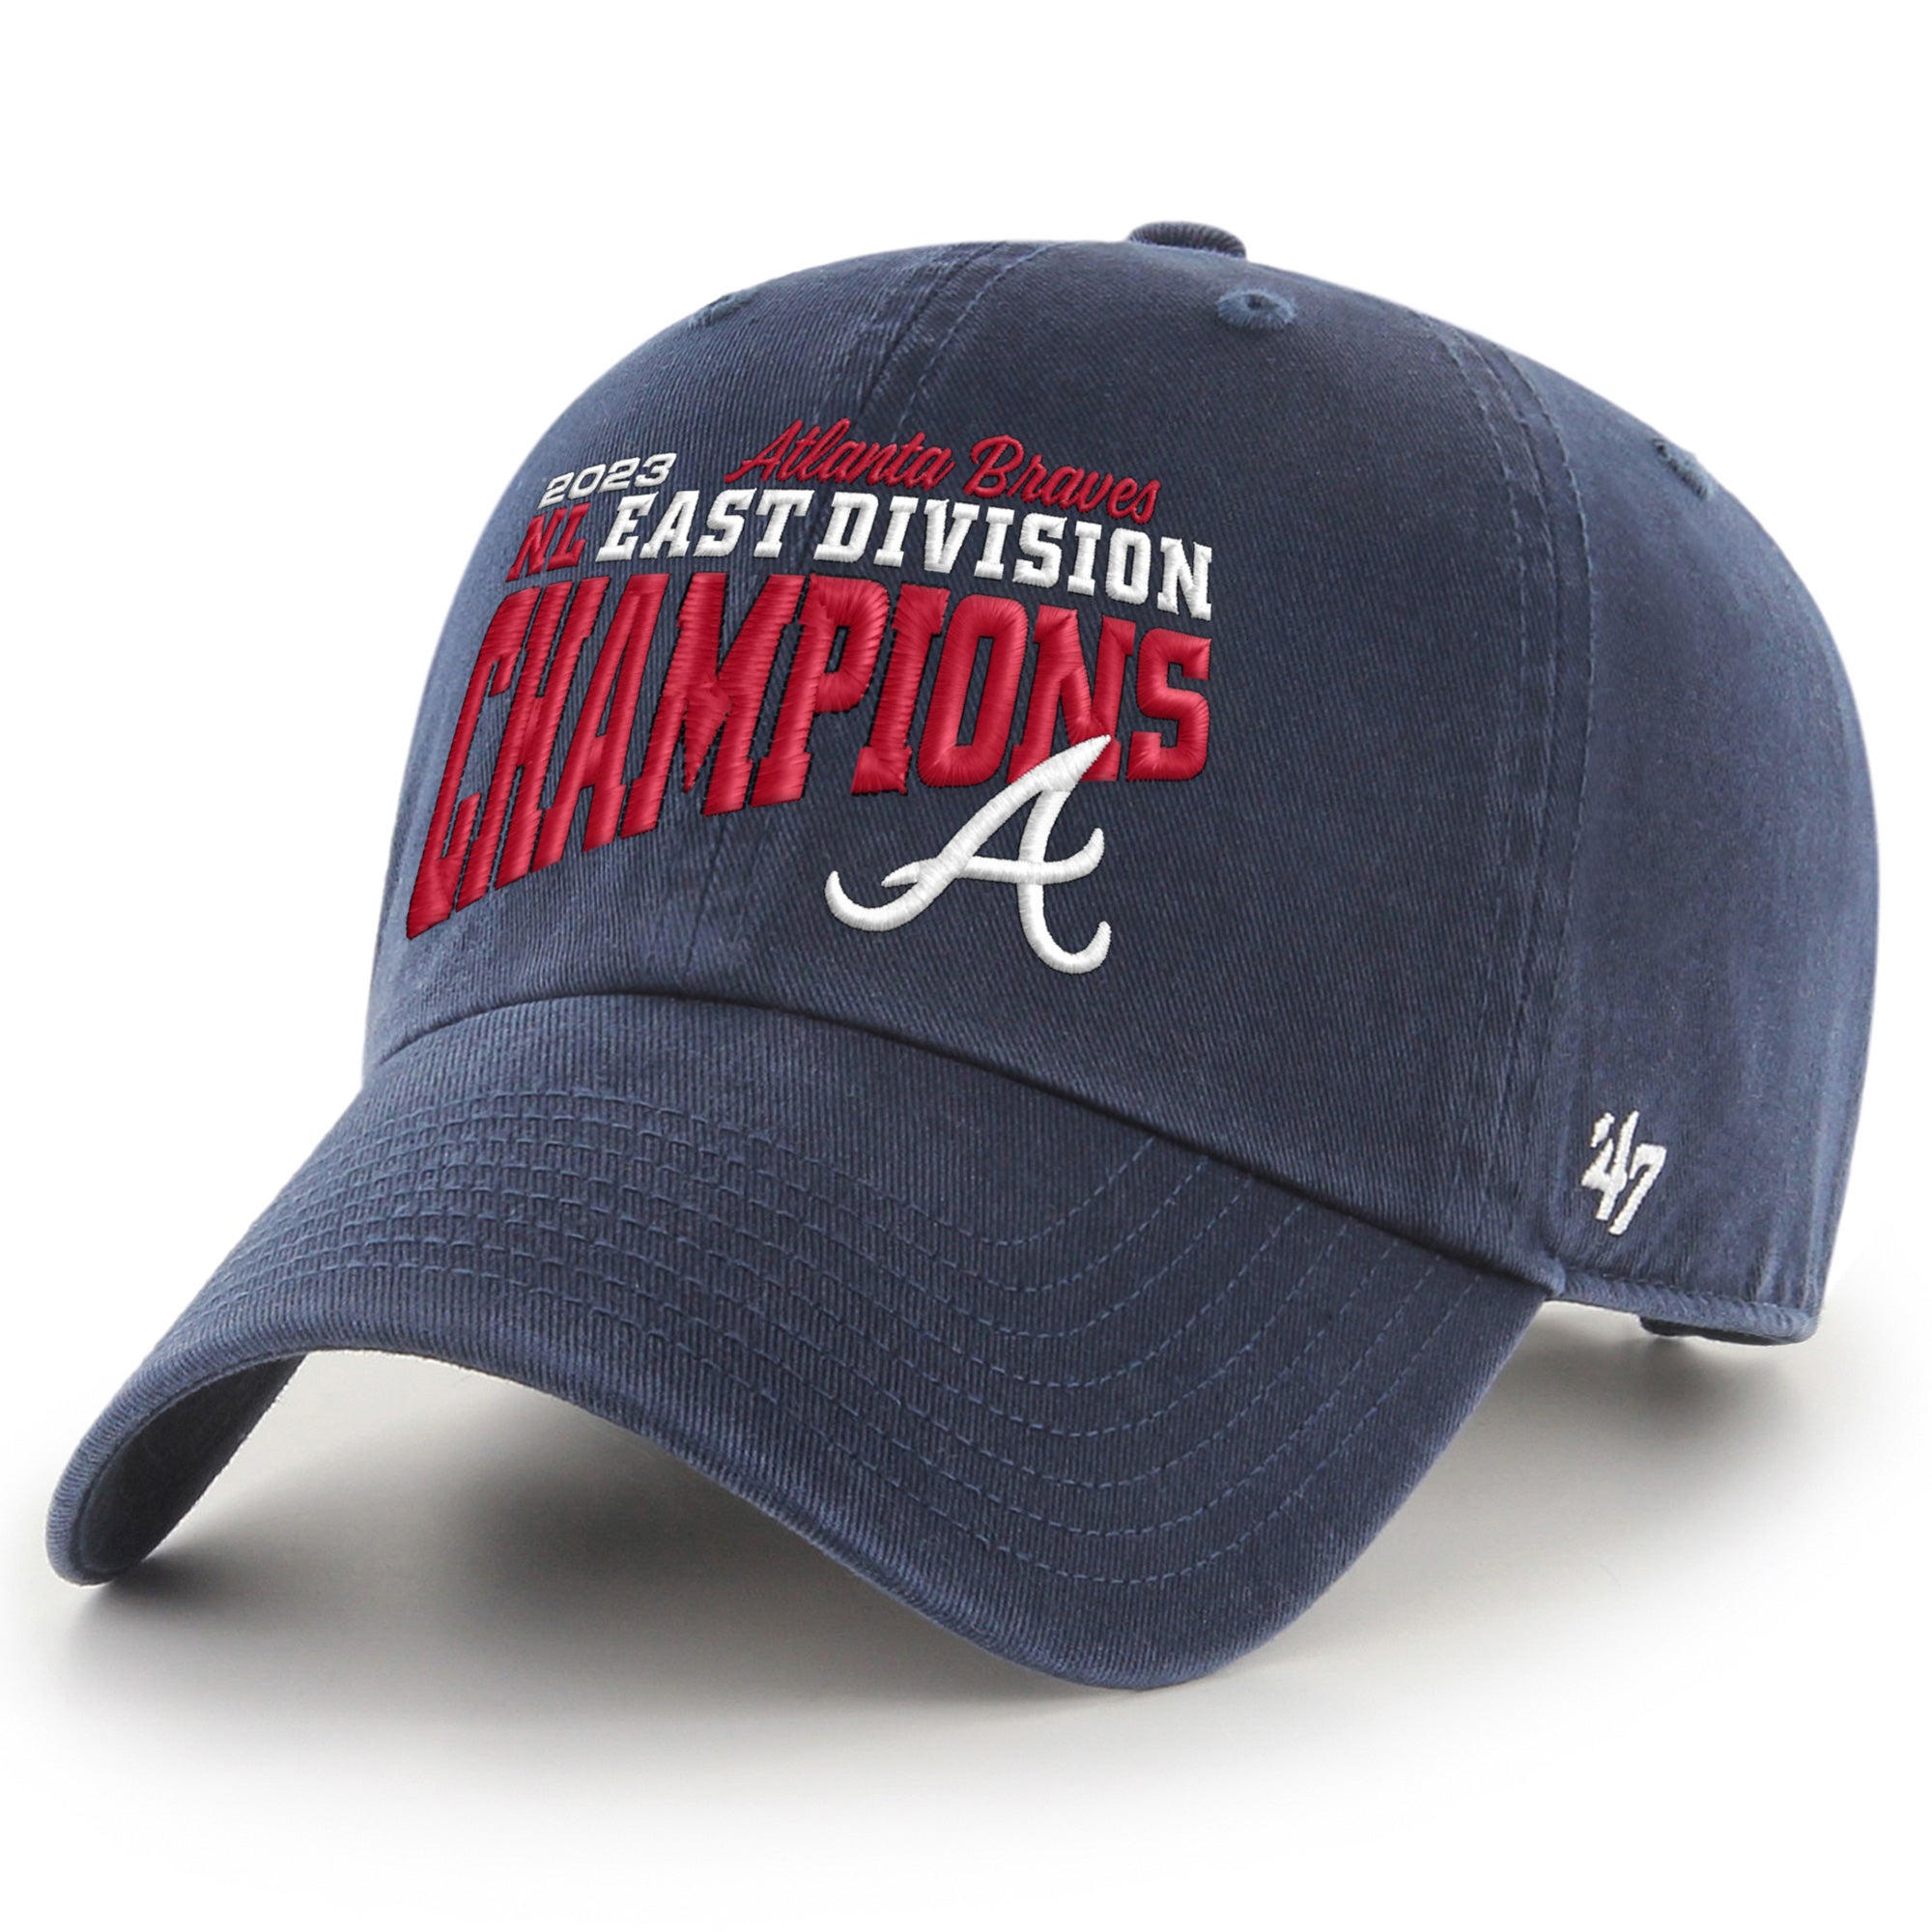 Atlanta Braves '47 2023 NL East Division Champions Cleanup